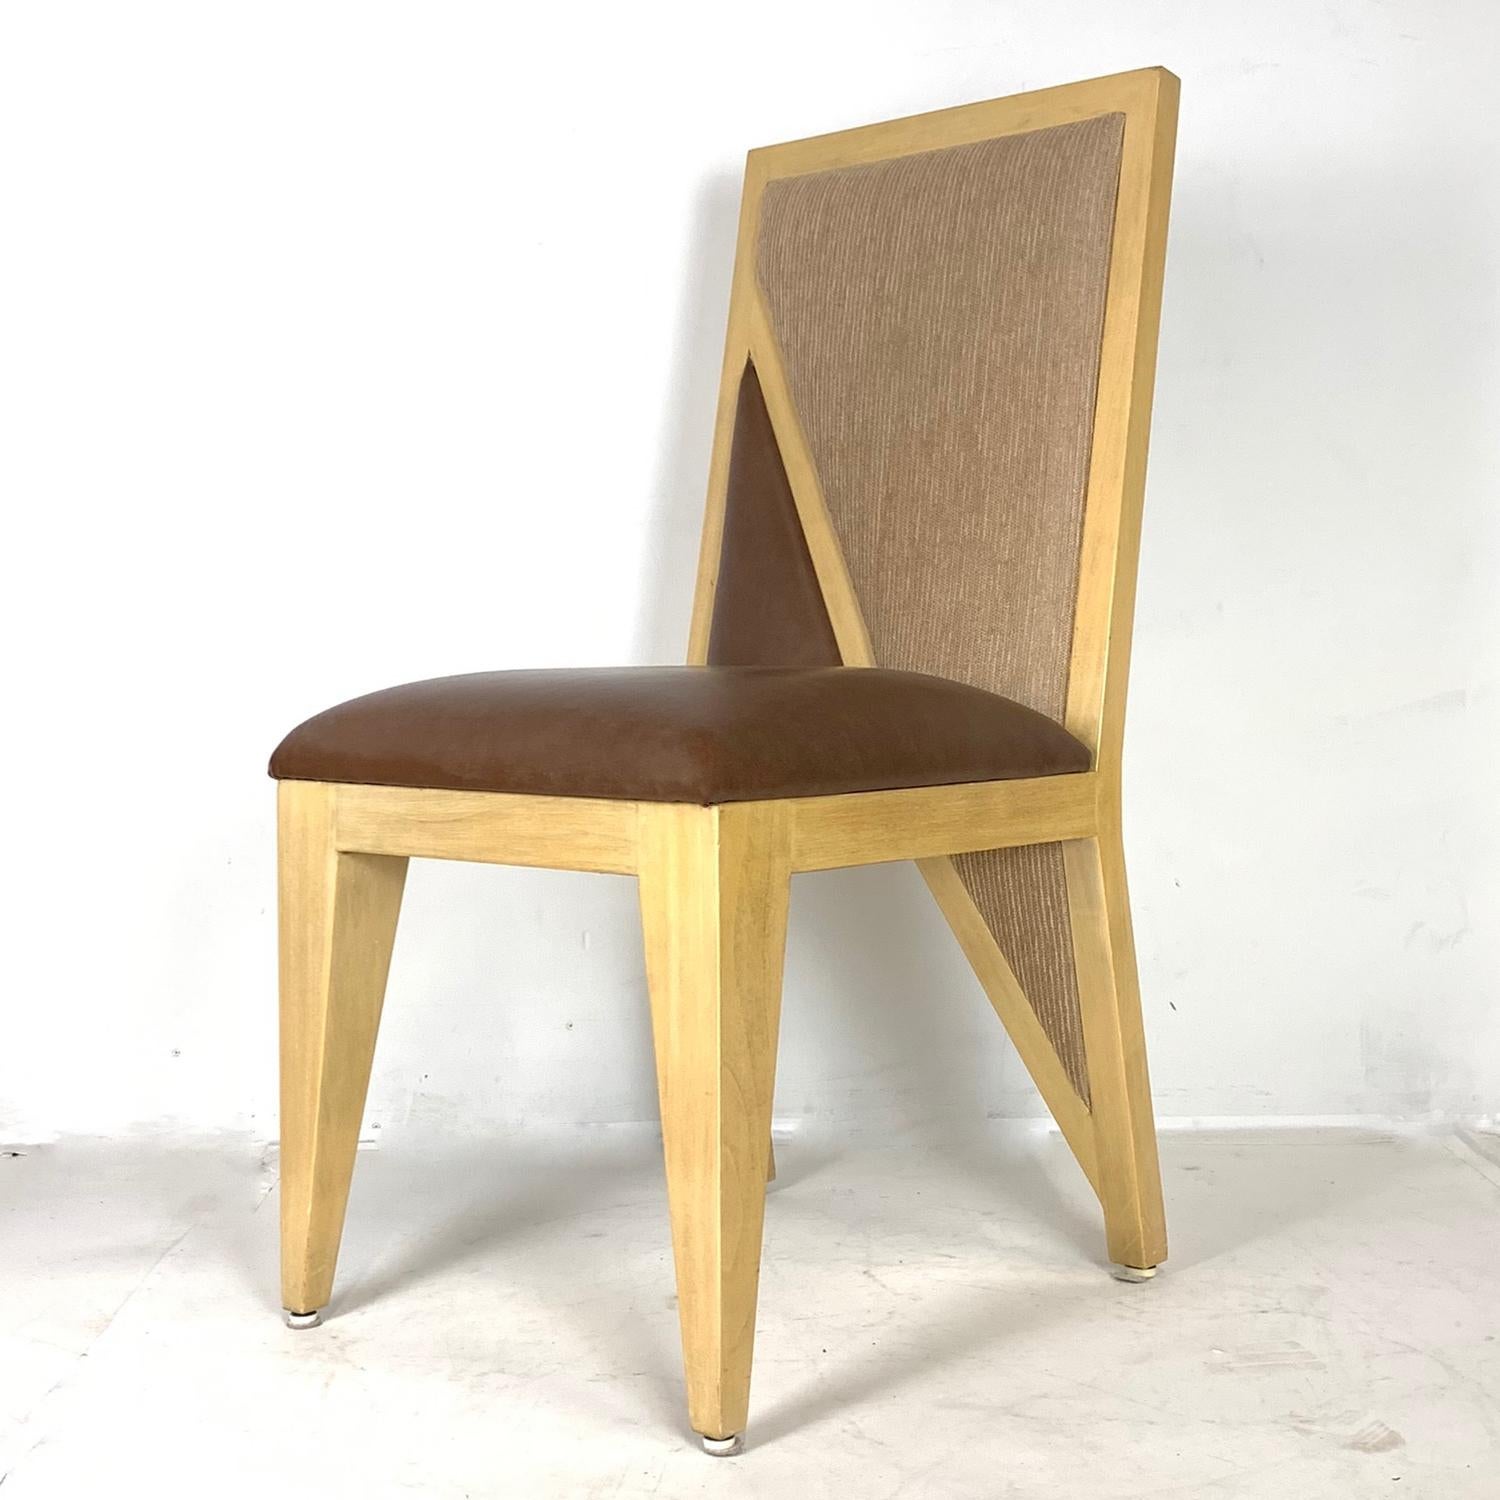 Fantastic set of very sturdy solid wood Postmodern chairs. 8 side chairs and 2 armchairs. These chairs are stunning. Seat upholstery is in Naugahyde for practical purposes.